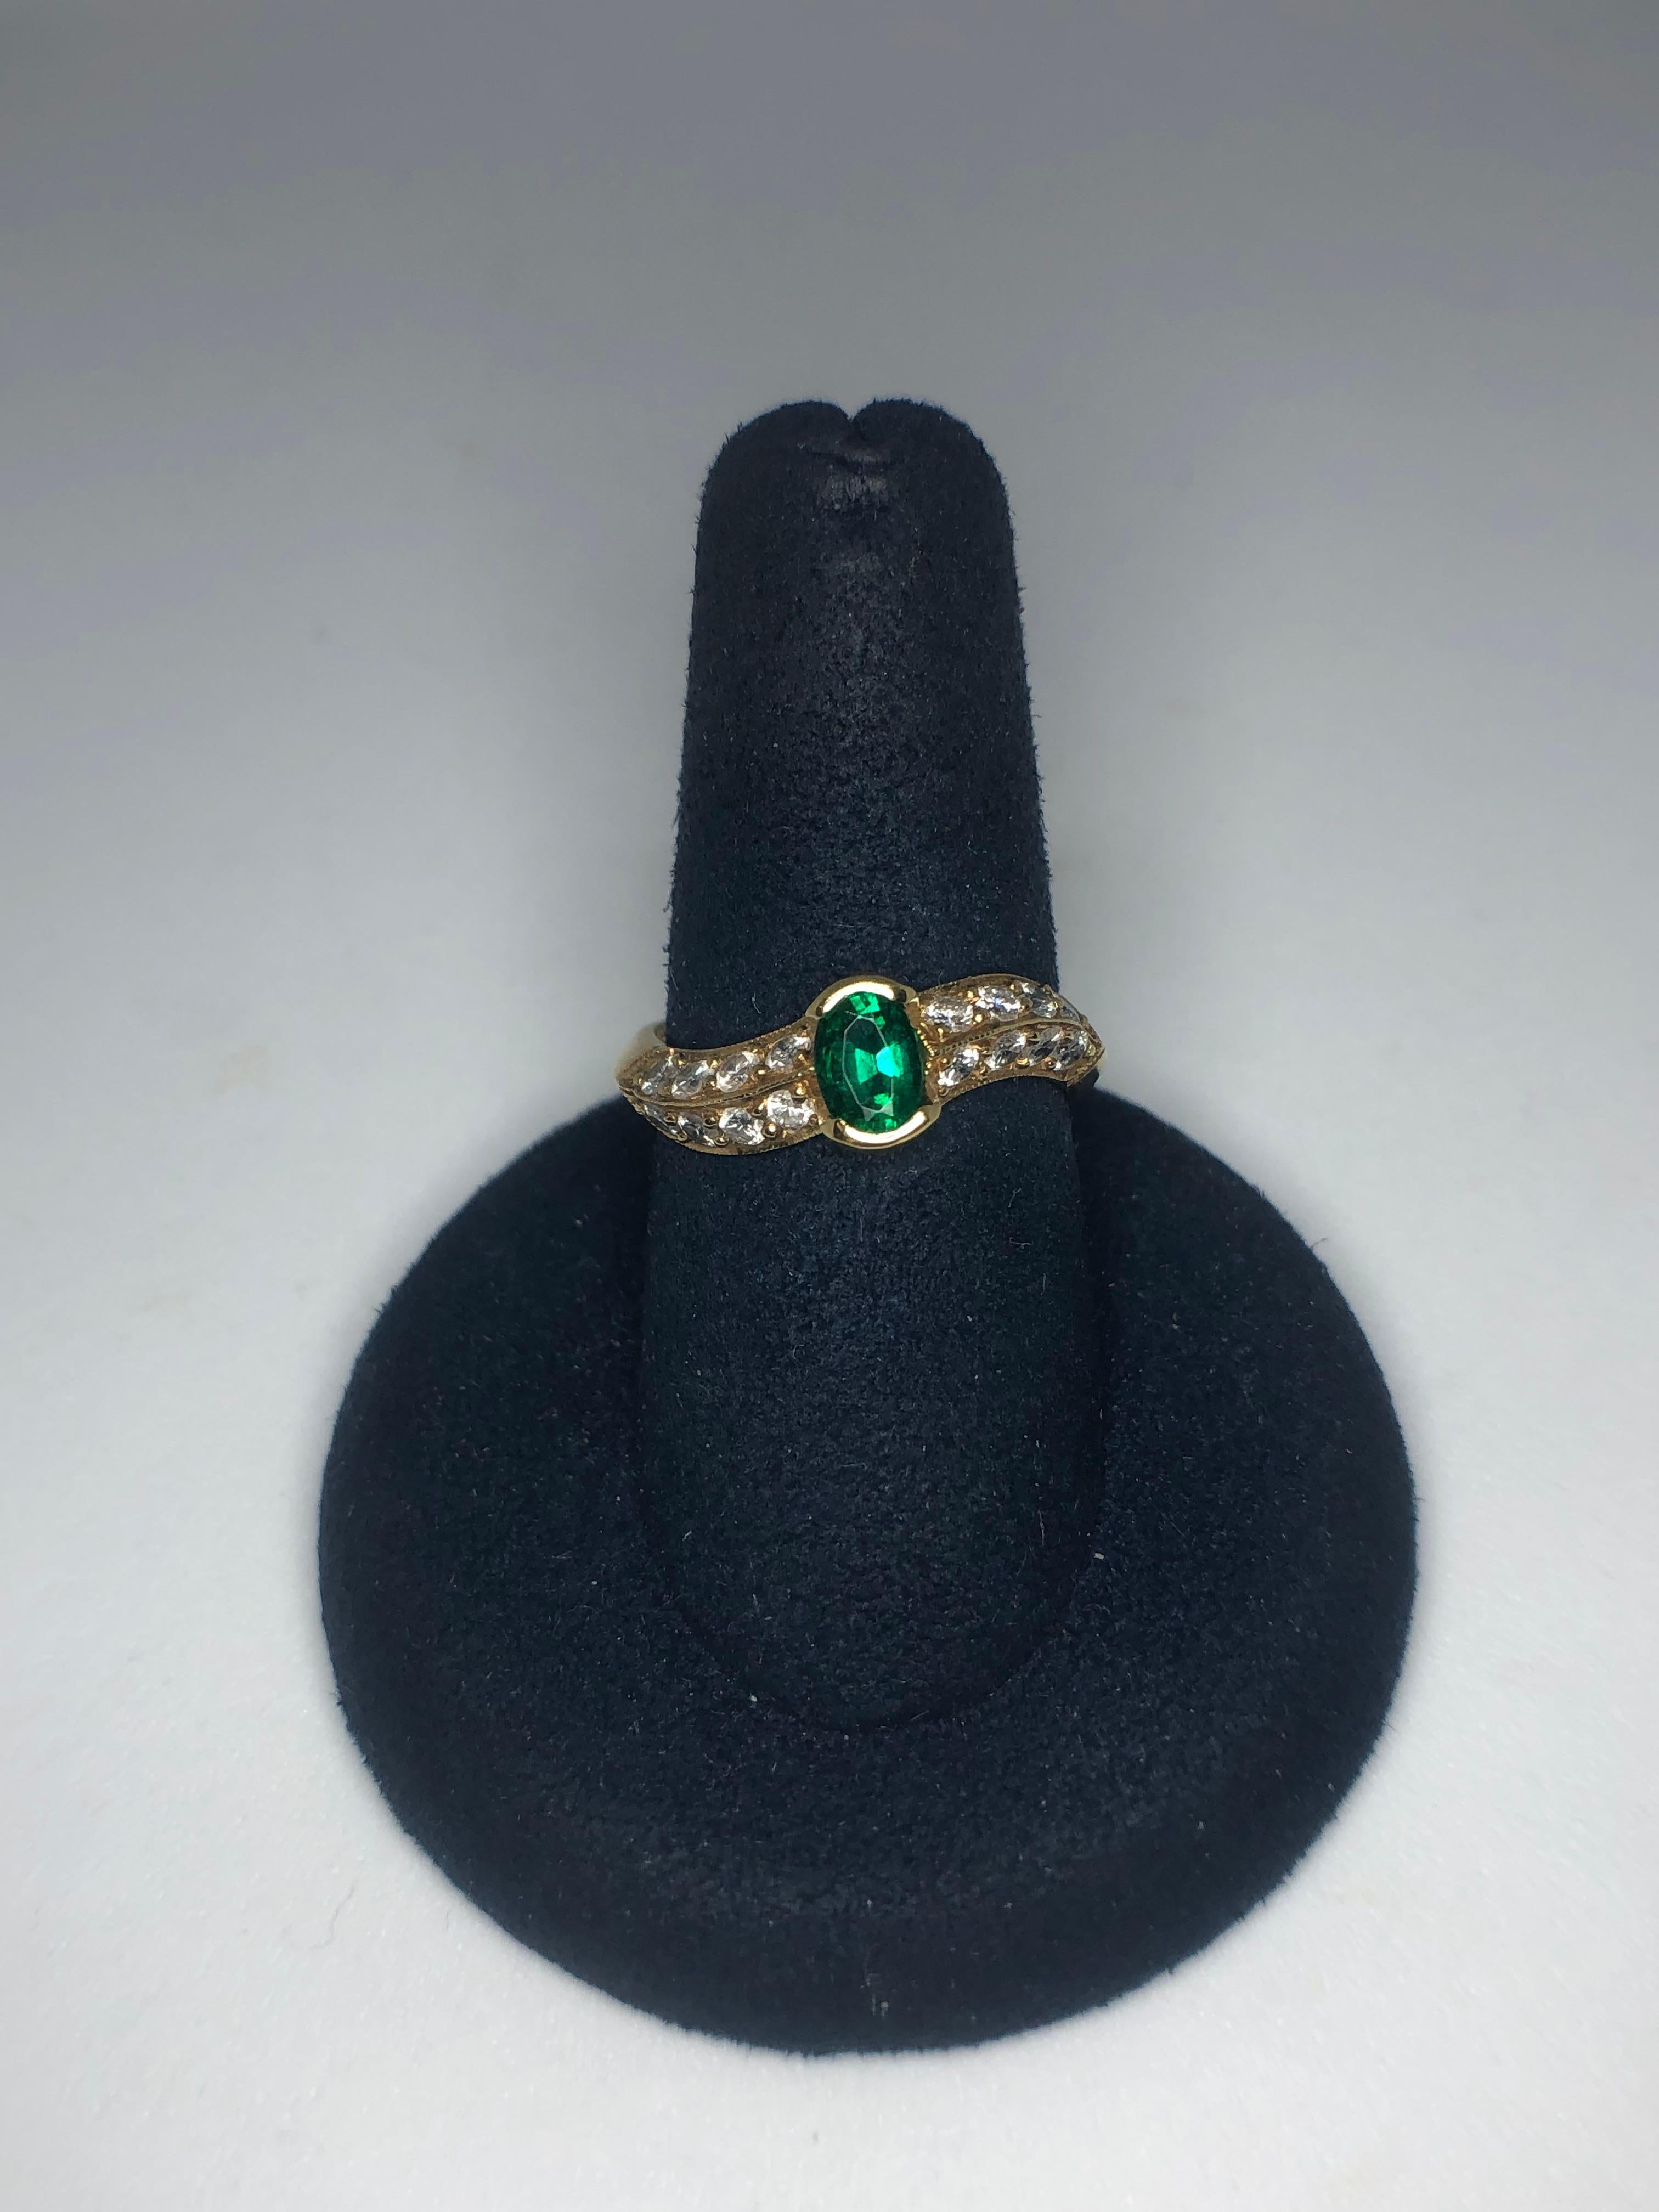 Lady's 18kt yellow gold emerald and diamond ring by Armand Jacoby/Celebrity, 1 - oval emerald = .47ct total weight, diamonds = .52ct, average color G-H, average clarity SI1. Size 6.75